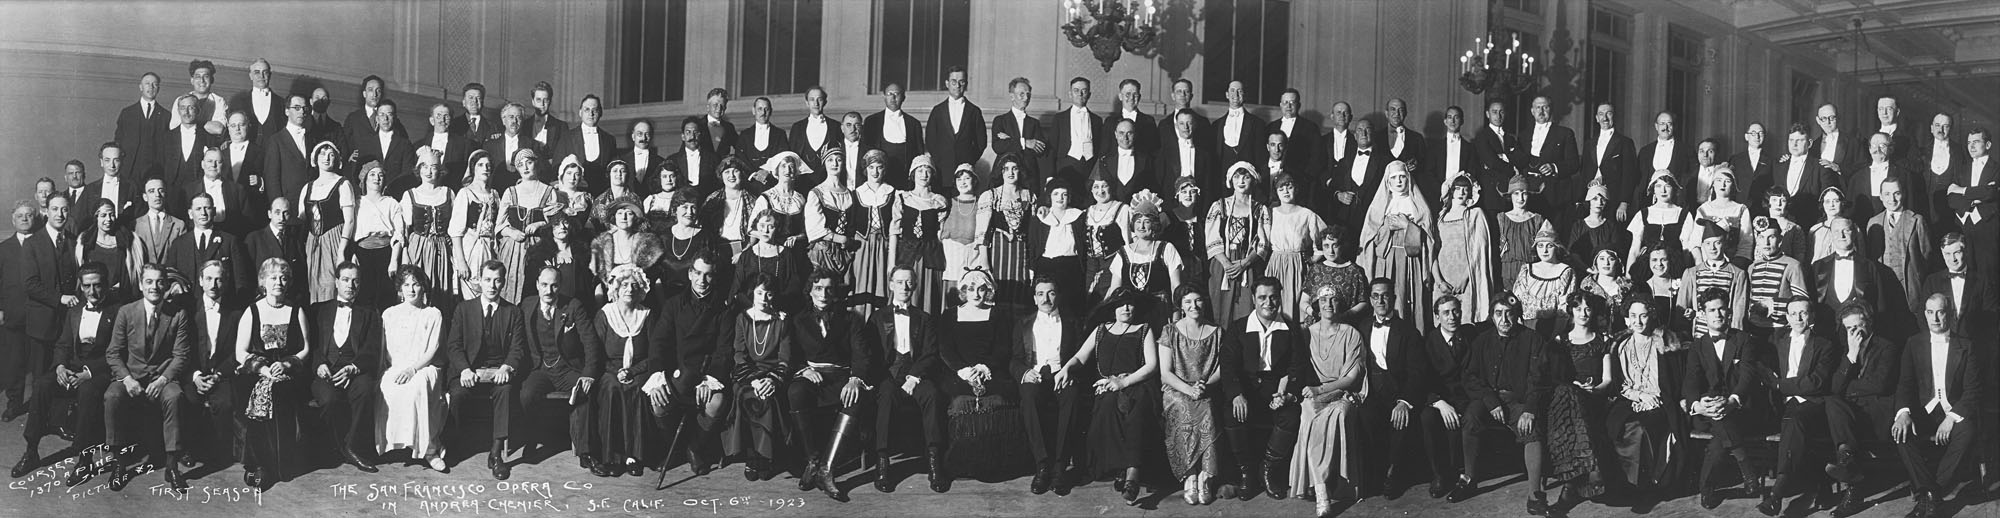 Large black-and-white group photo of people in costumes and tuxes on risers inside high-ceilinged space